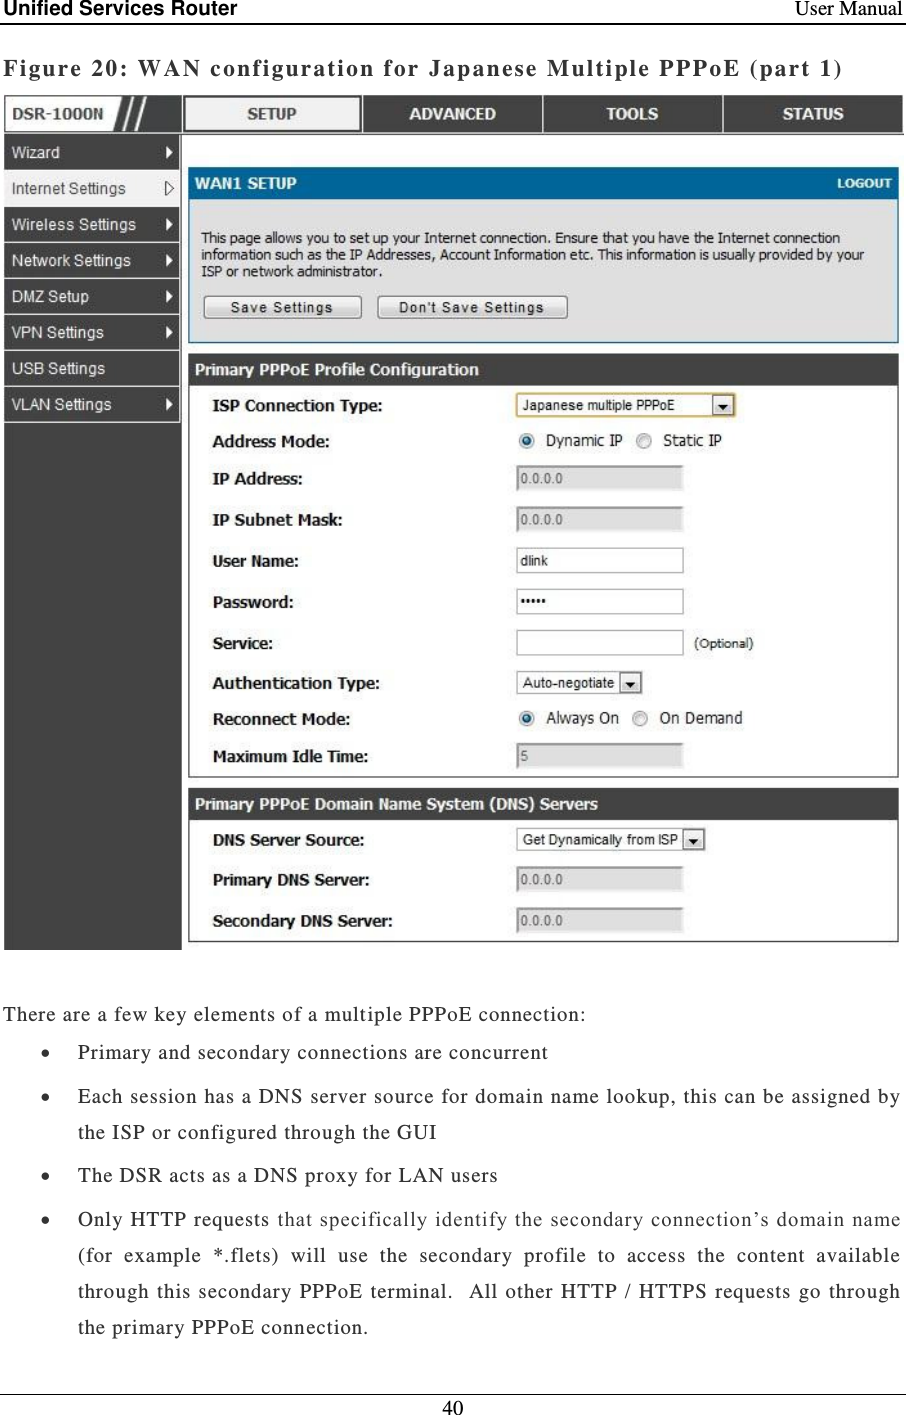 Unified Services Router    User Manual 40  Figure 20: WAN conf iguration for  Japanese Multiple PPPoE (part 1)    There are a few key elements of a multiple PPPoE connection:  Primary and secondary connections are concurrent   Each session has a DNS server source for domain name lookup, this can be assigned by the ISP or configured through the GUI   The DSR acts as a DNS proxy for LAN users  Only  HTTP requests that specifically identify the secondary connection’s domain name (for  example  *.flets)  will  use  the  secondary  profile  to  access  the  content  available through  this  secondary  PPPoE  terminal.   All  other  HTTP  / HTTPS requests  go  through the primary PPPoE connection.  